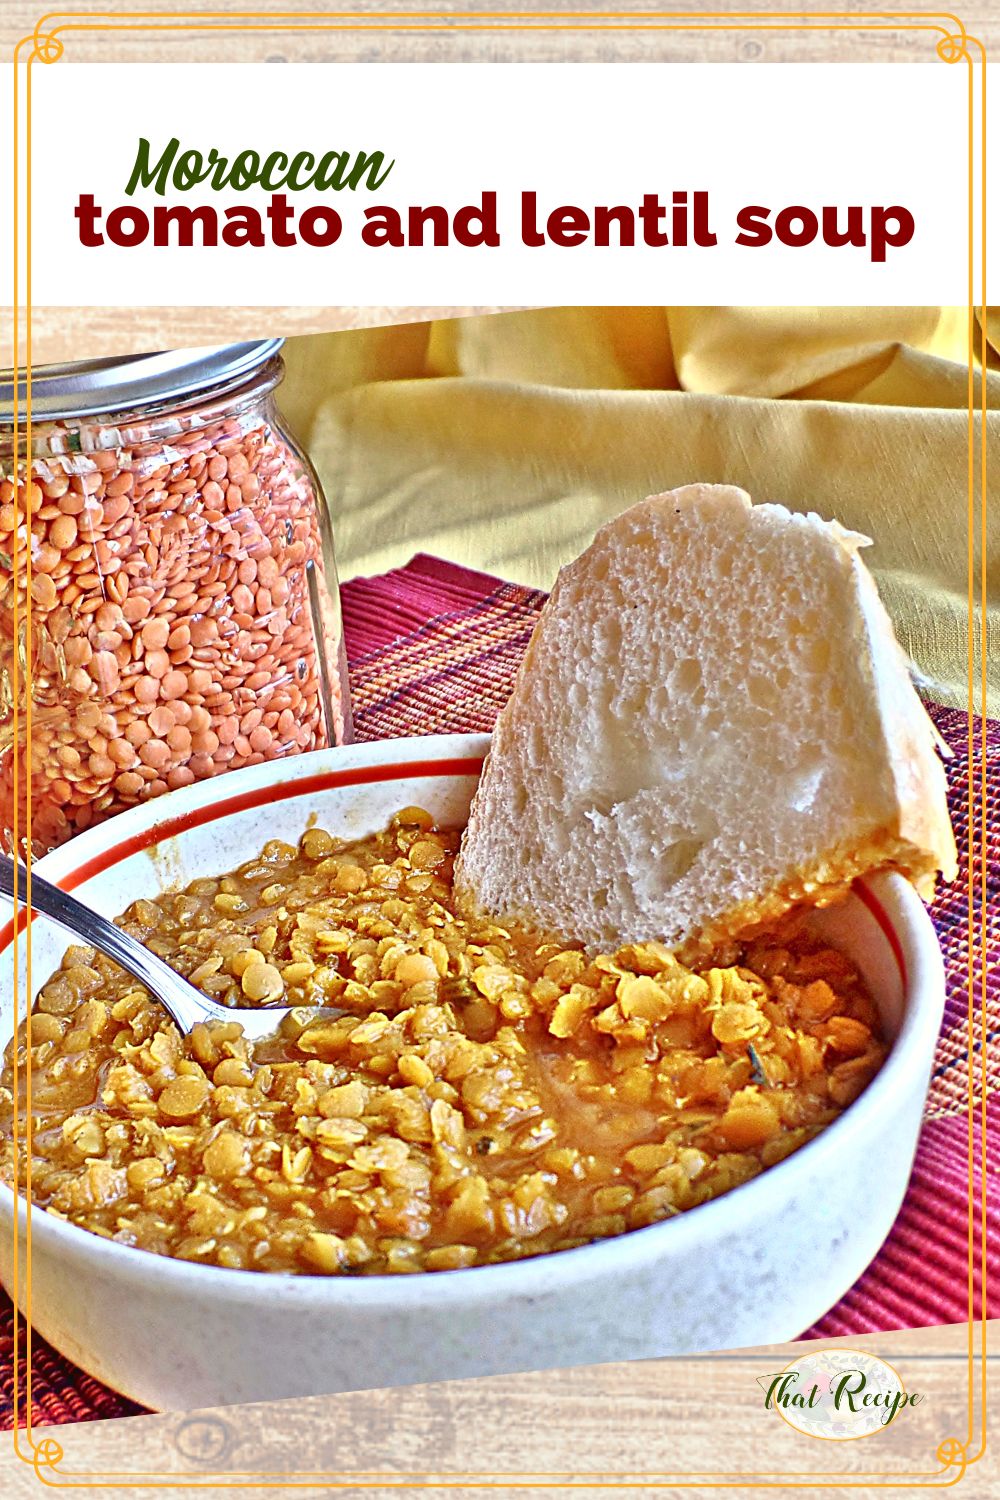 lentil soup in a bowl with text overlay "Moroccan tomato and lentil soup"